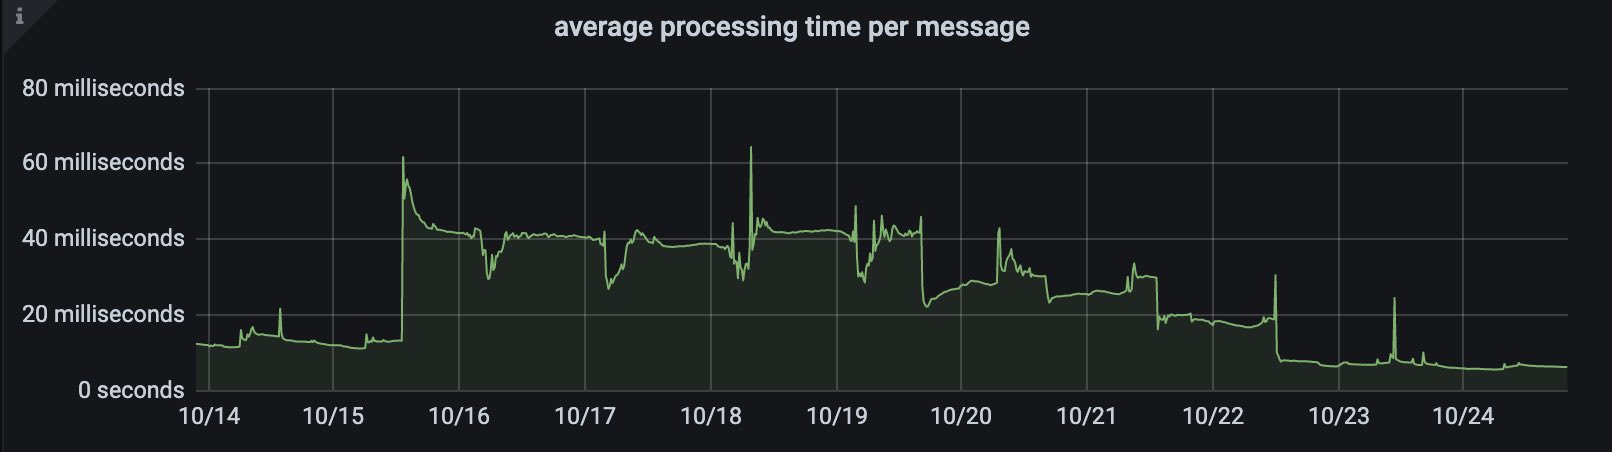 graph showing average provessing time per message